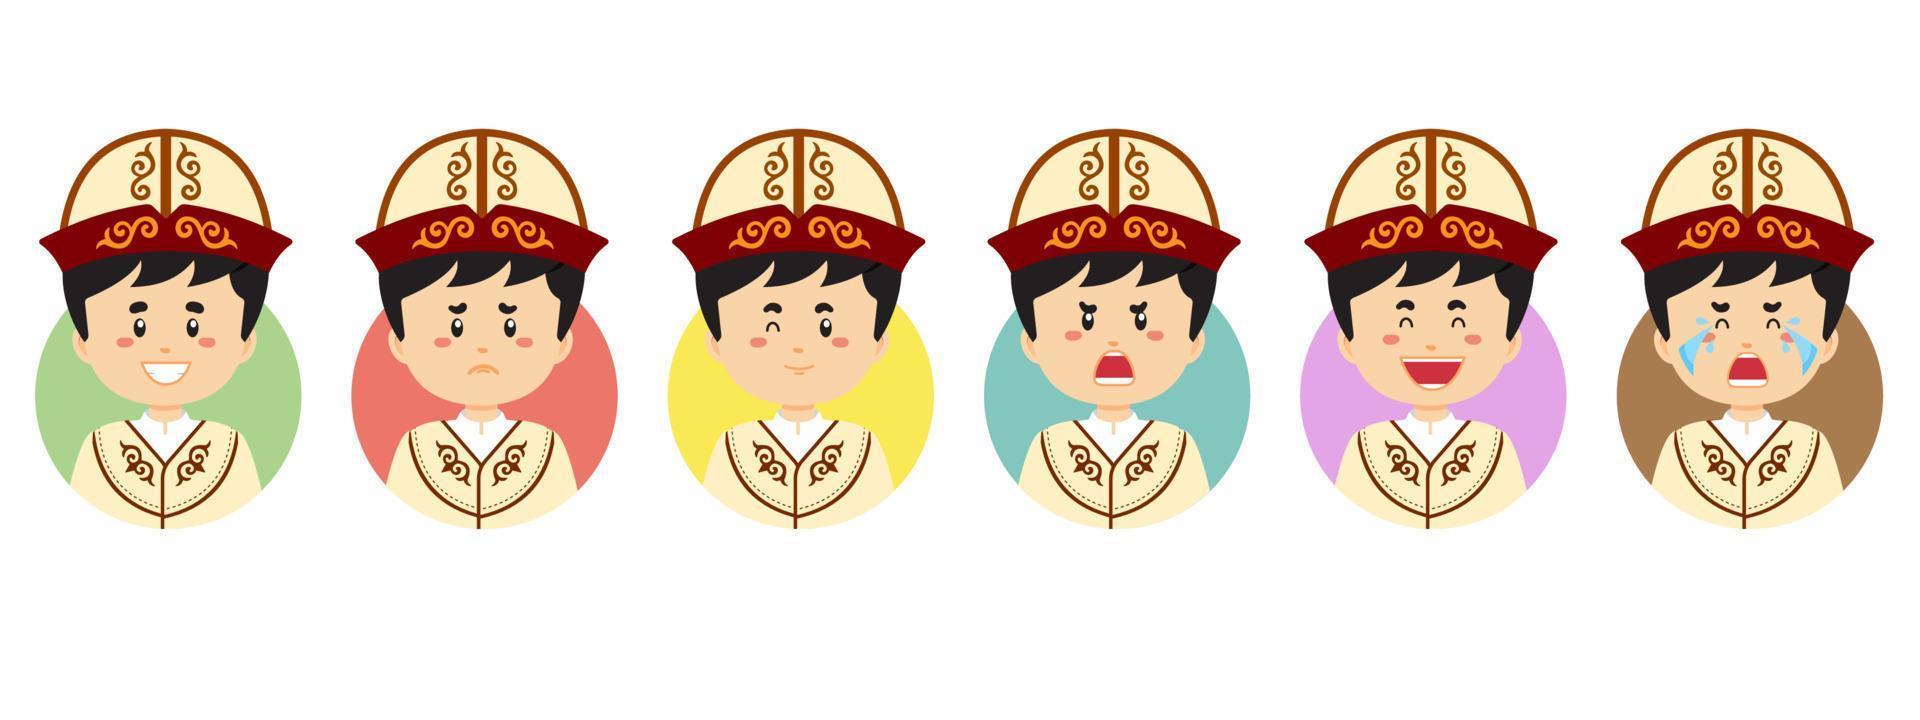 Kyrgyzstan Avatar with Various Expression vector